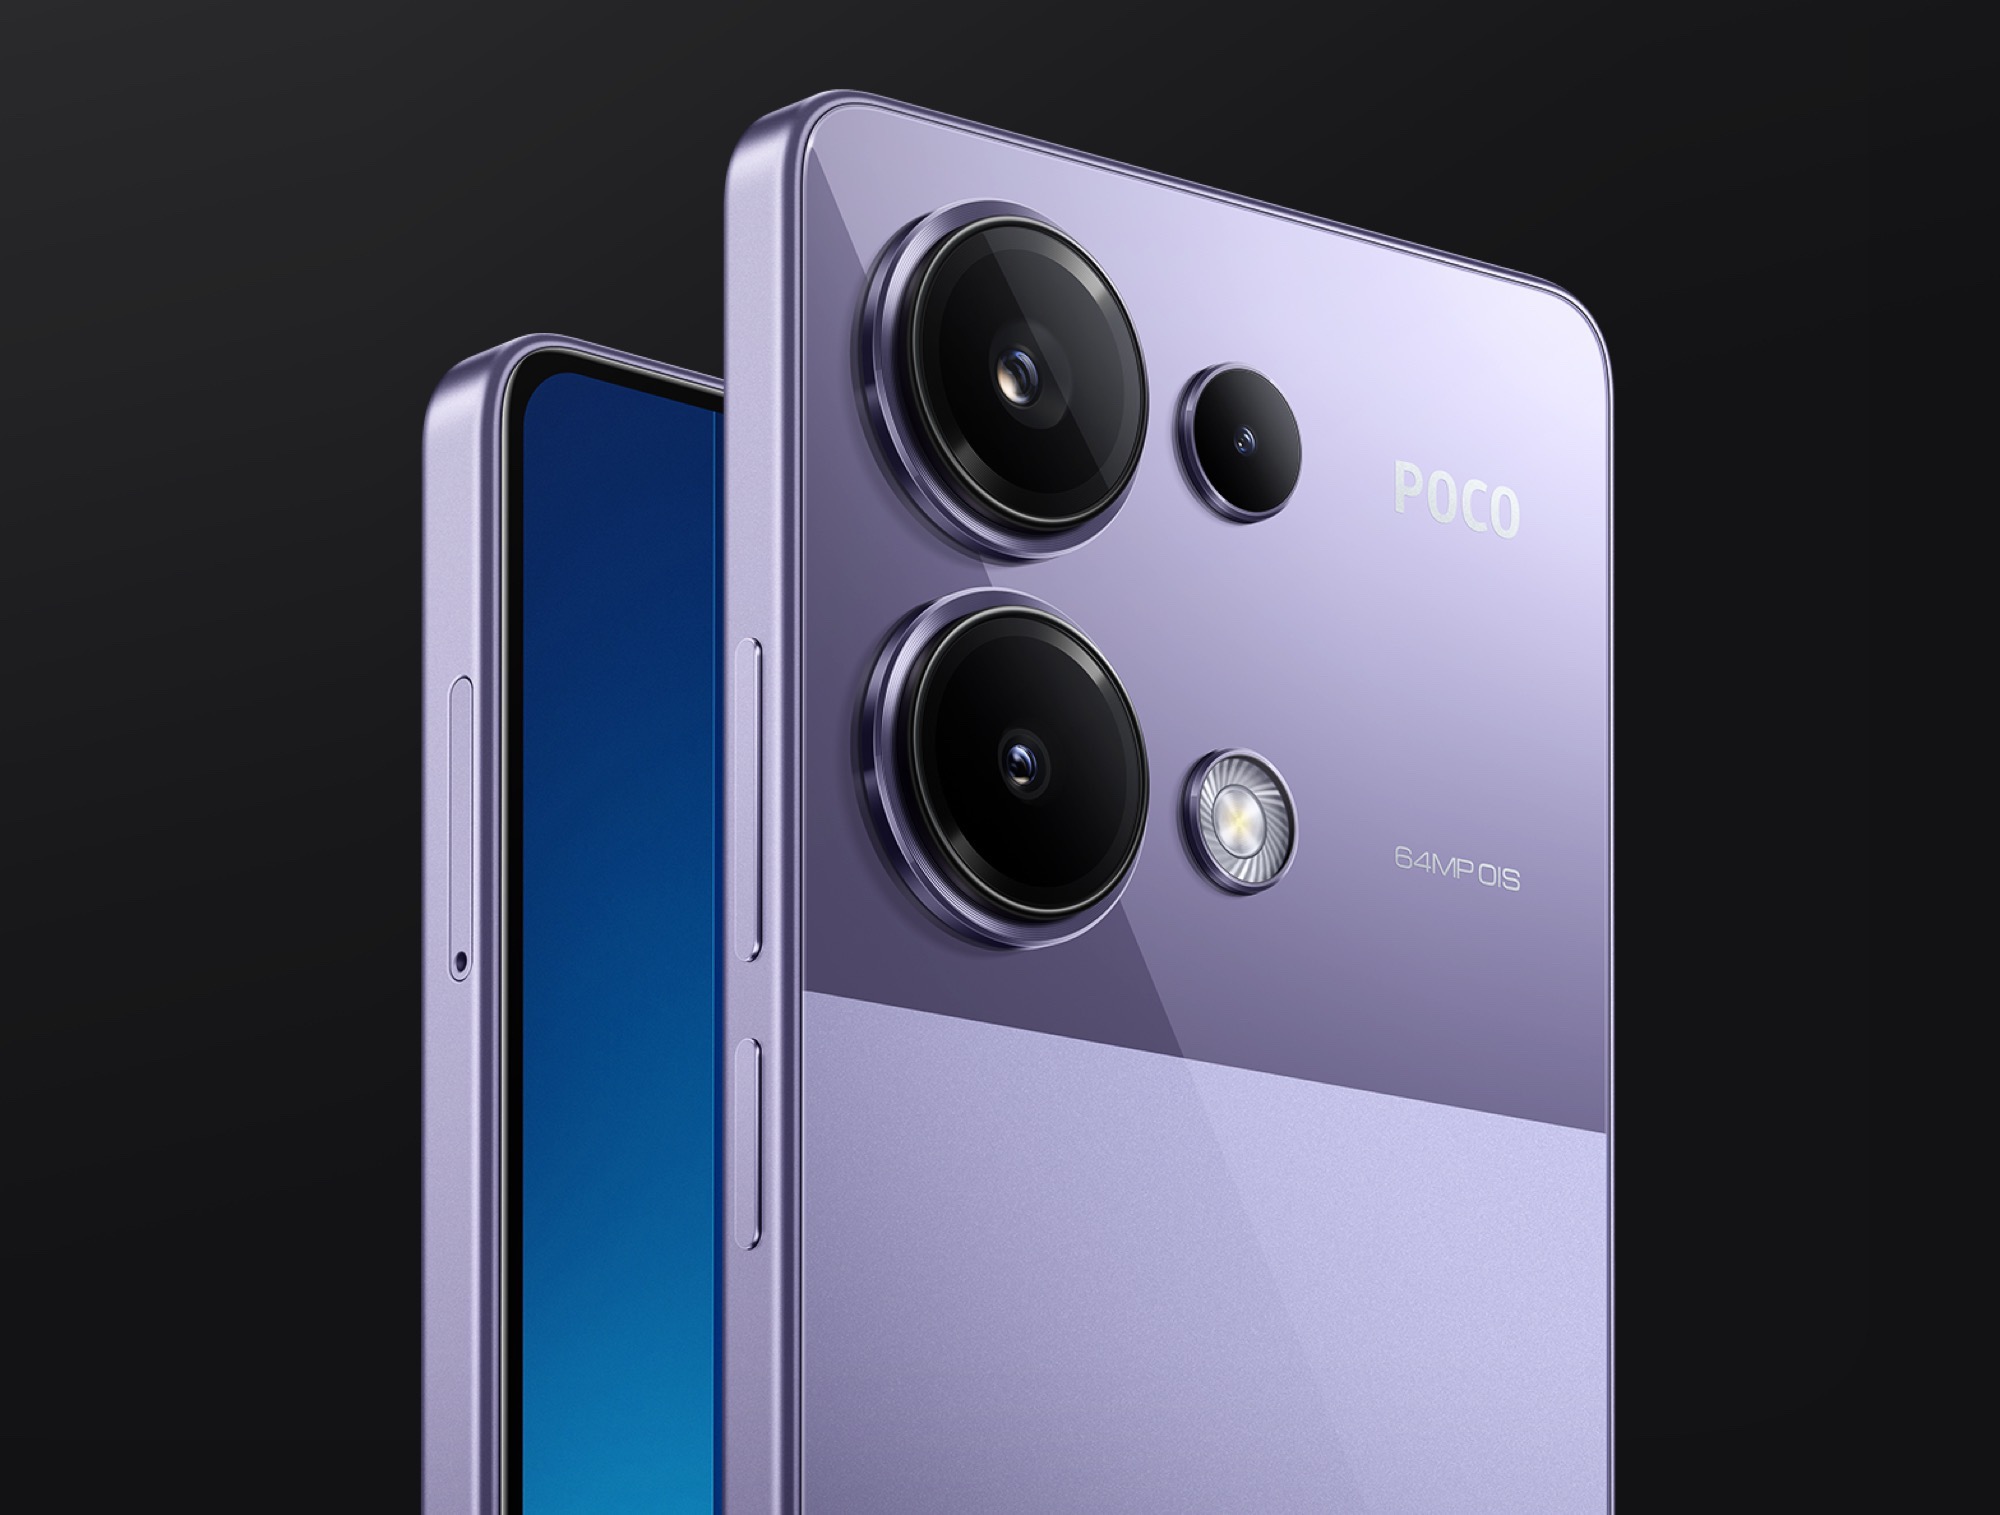 Xiaomi POCO M6 Pro 4G debuts globally for budget pricing with 120 Hz AMOLED  display and 64 MP triple cameras -  News